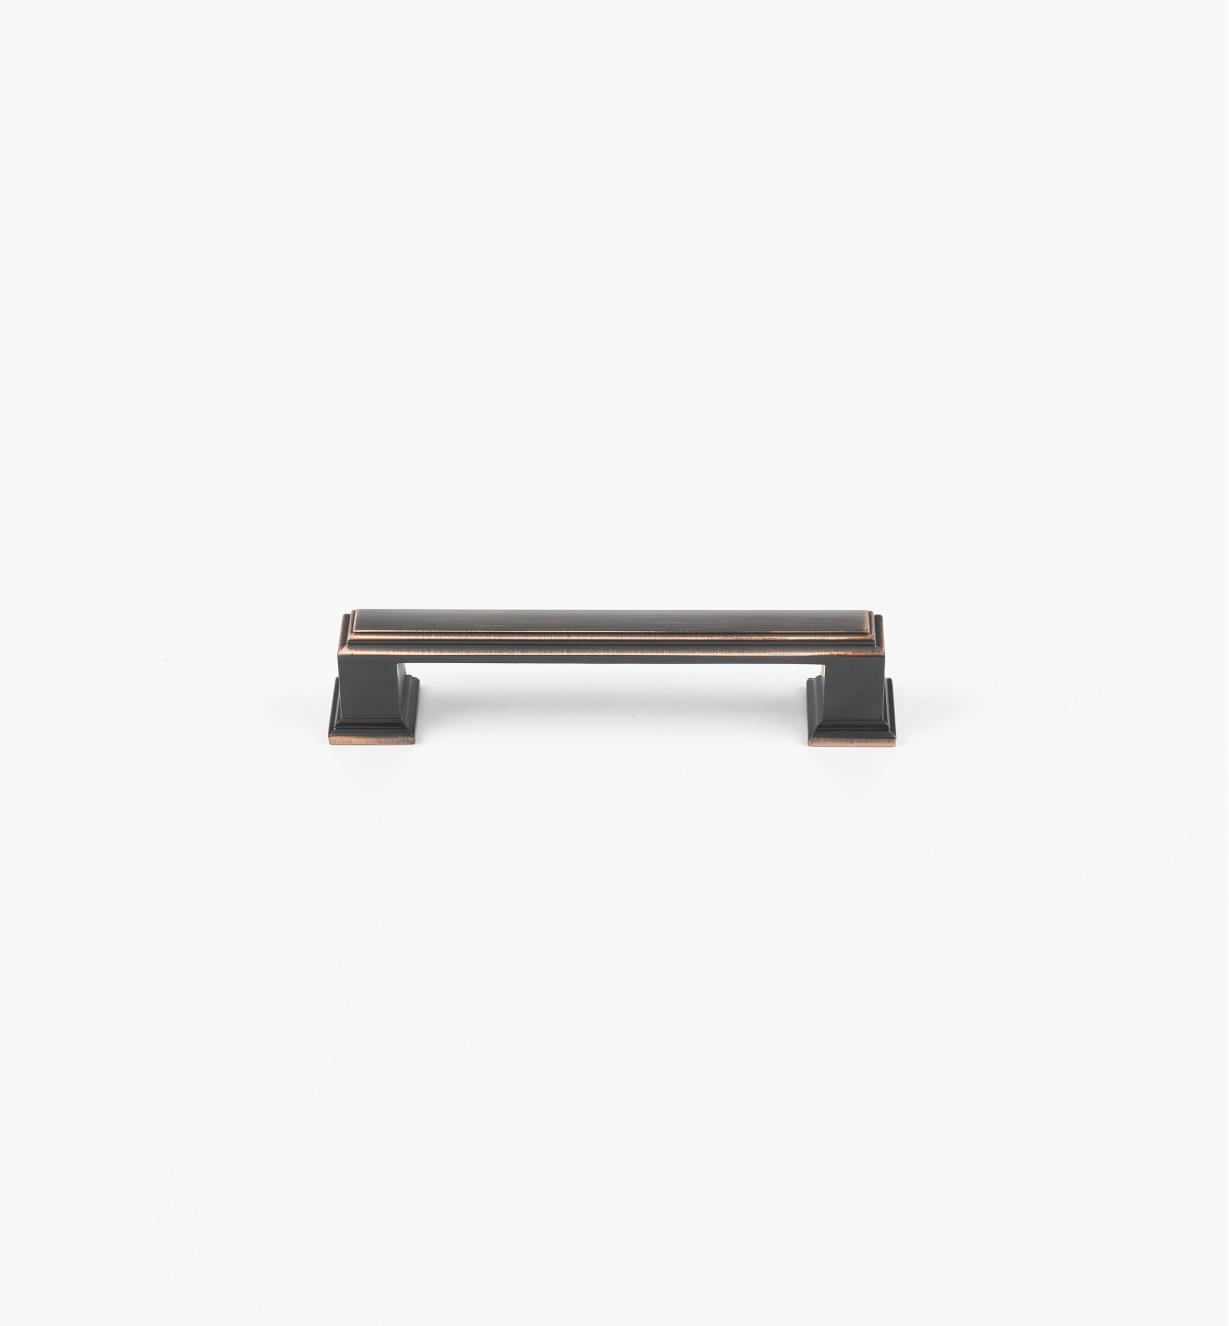 02A2533 - 96mm Oil-Rubbed Bronze Appoint Handle